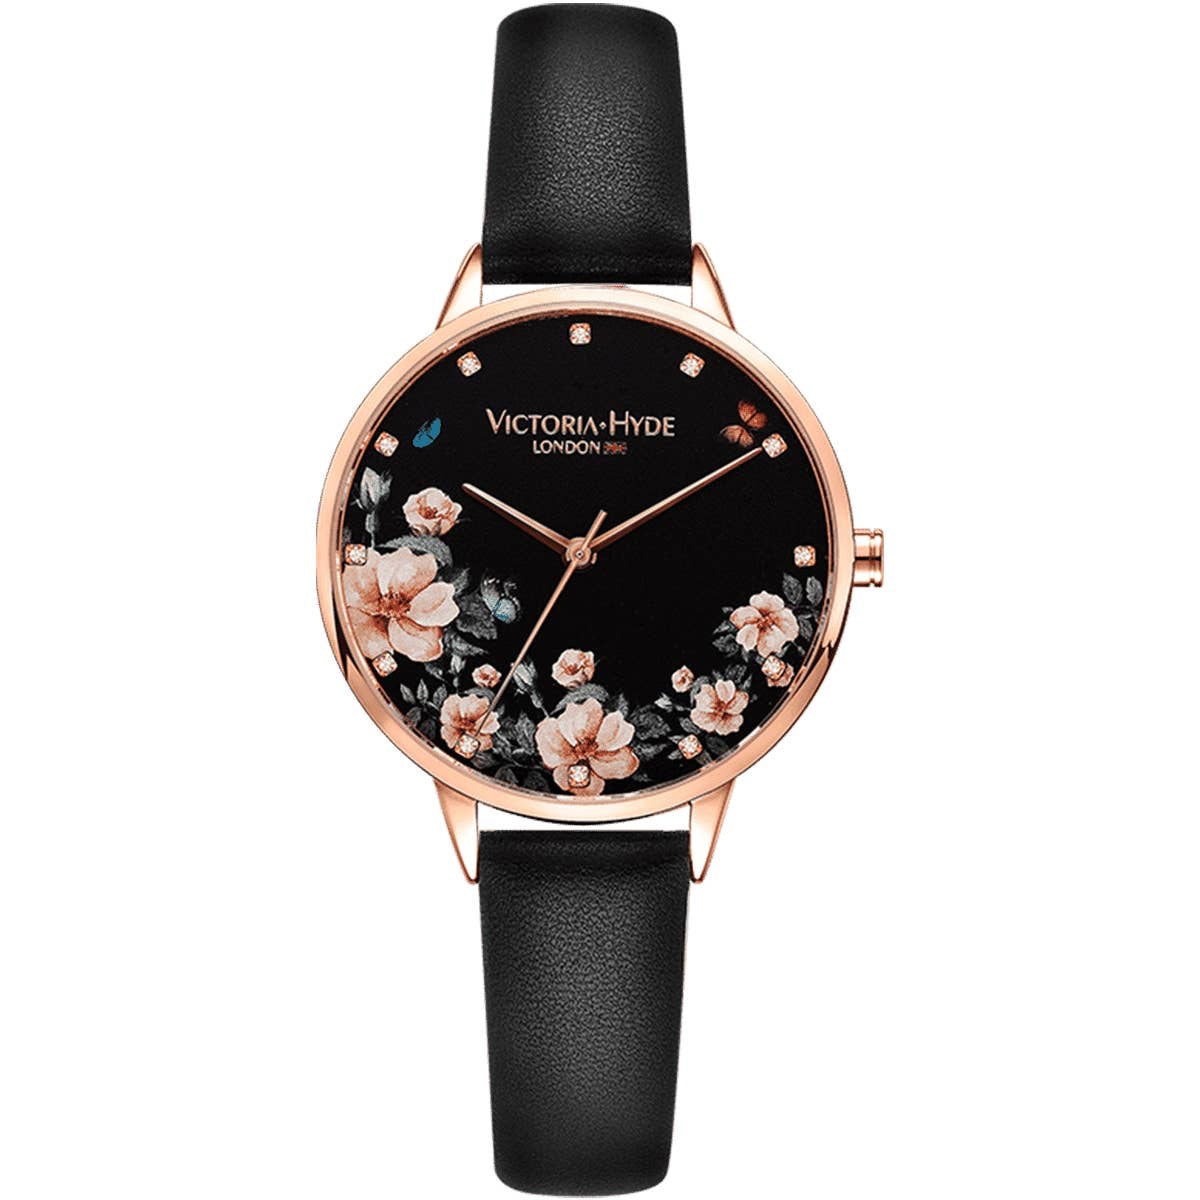 Victoria Hype London black and rose gold watch with flowers for women